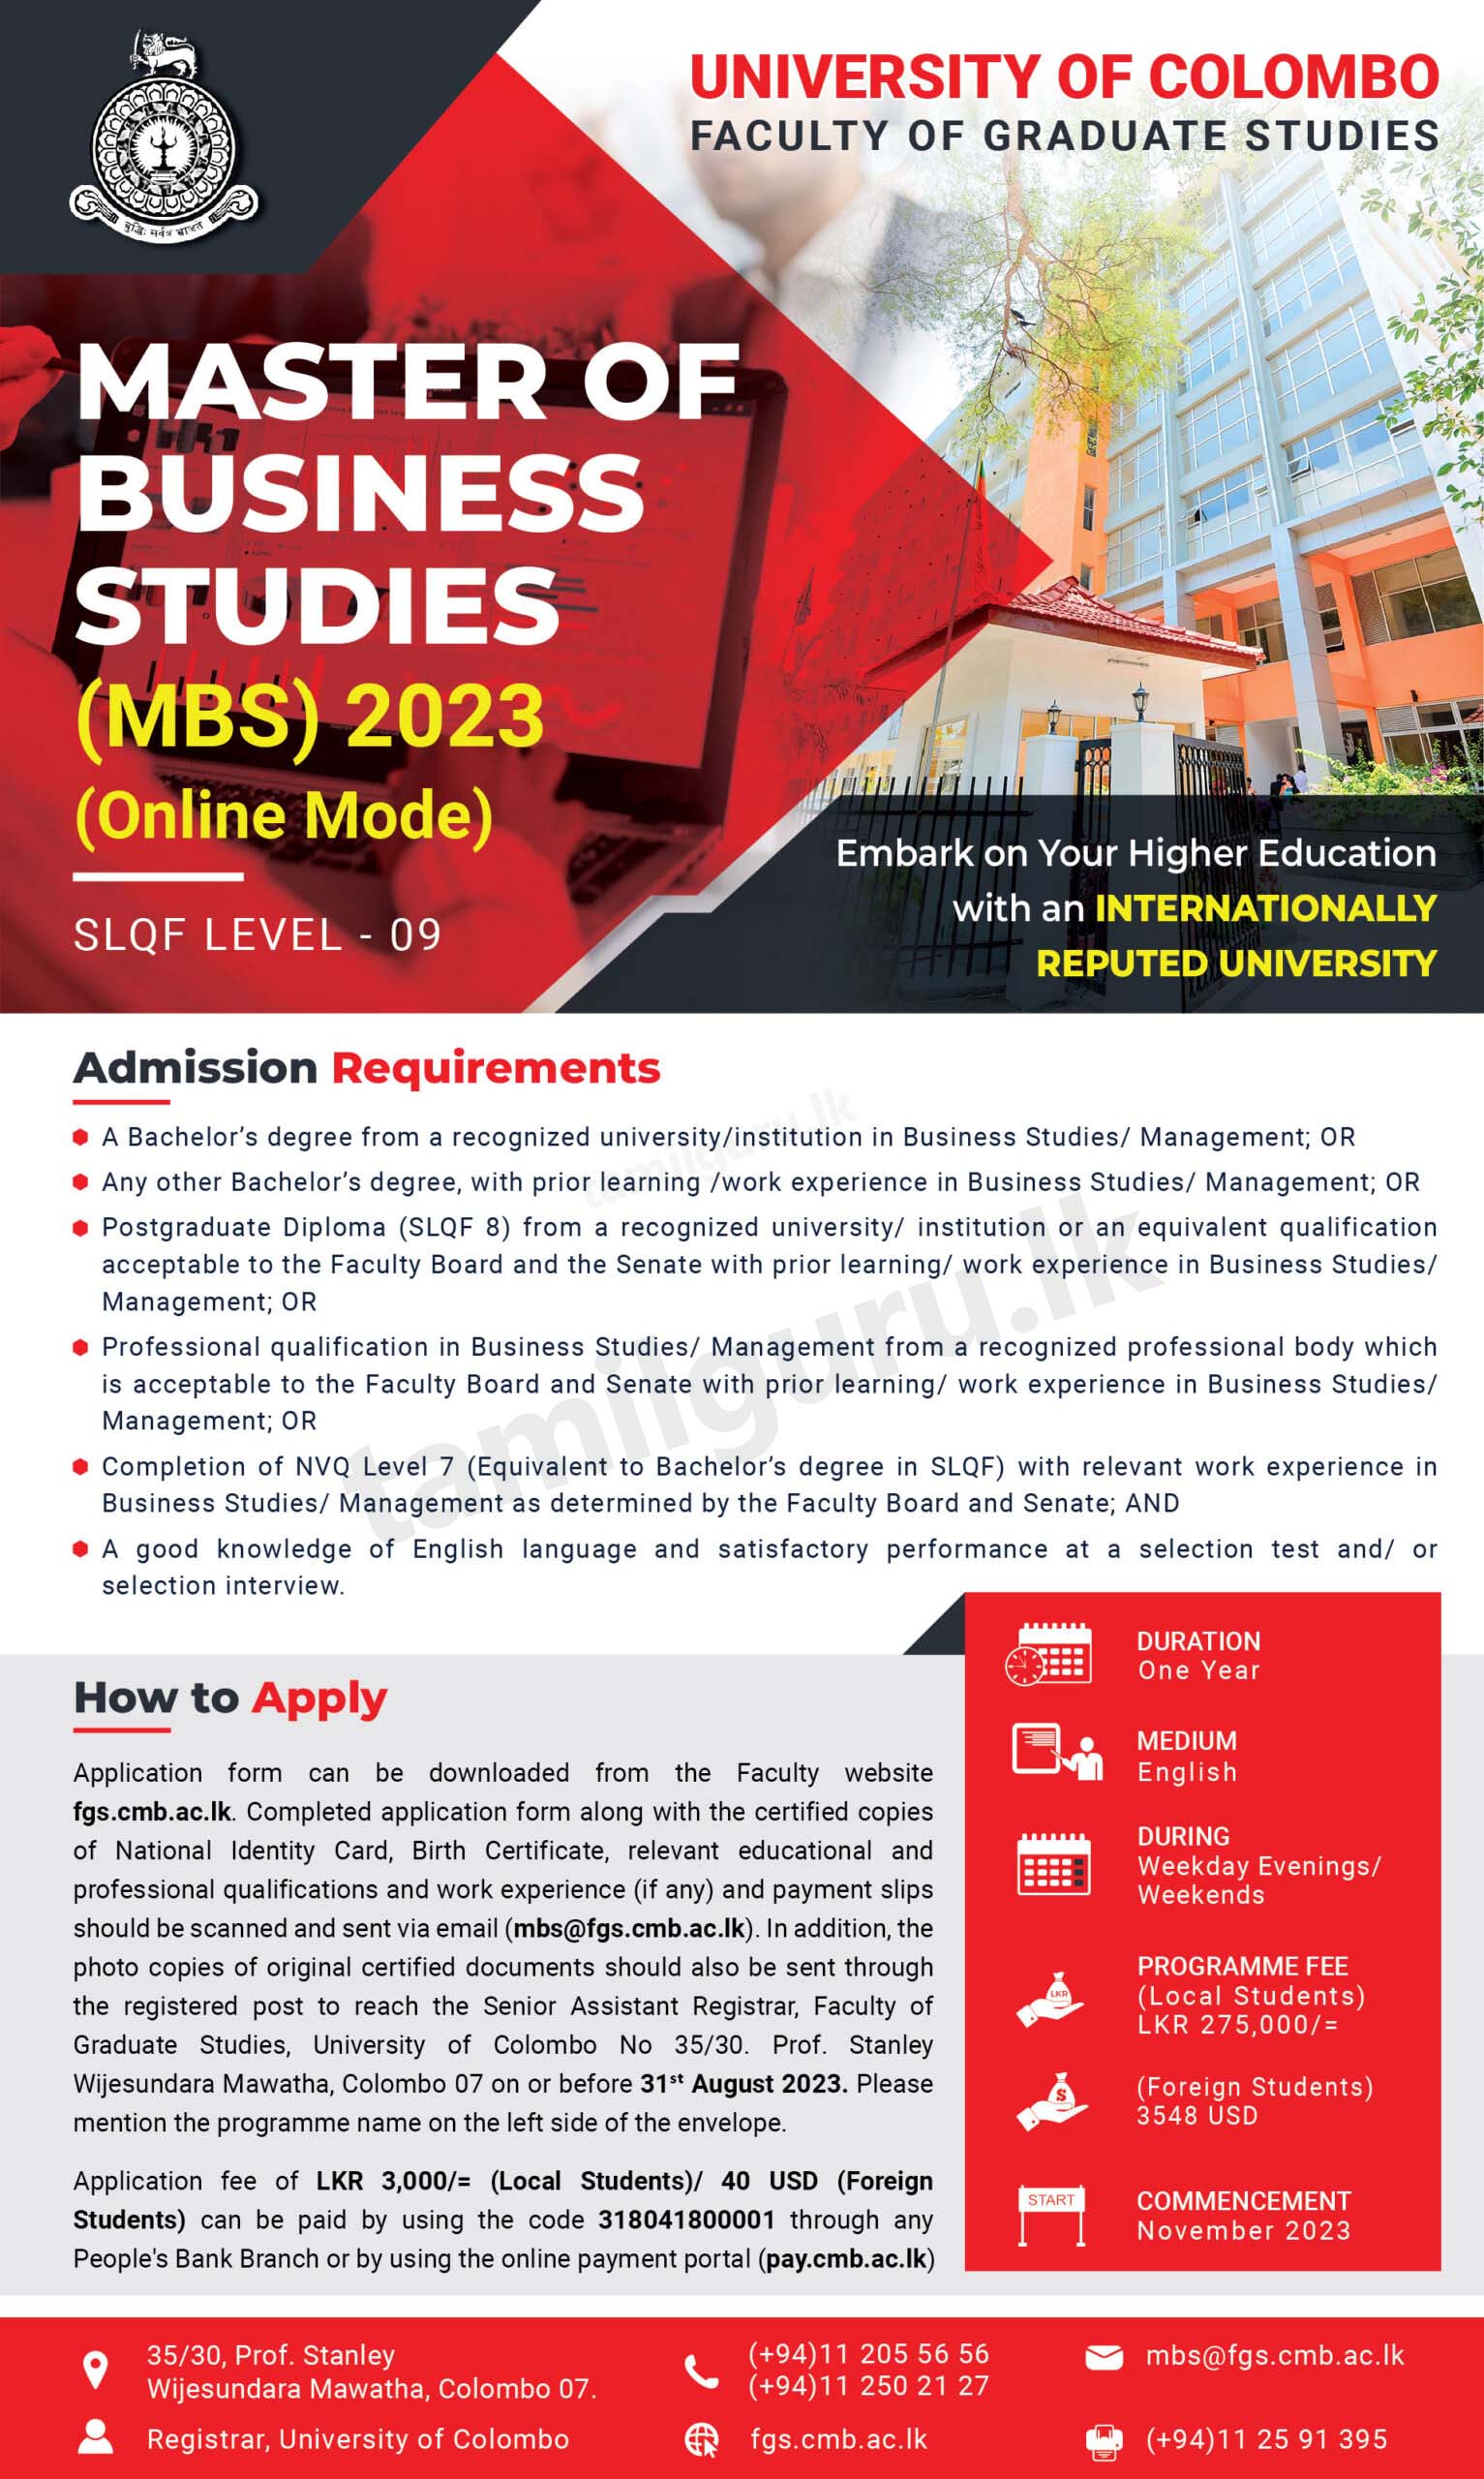 Master of Business Studies (MBS) (Online Mode) 2023 - University of Colombo